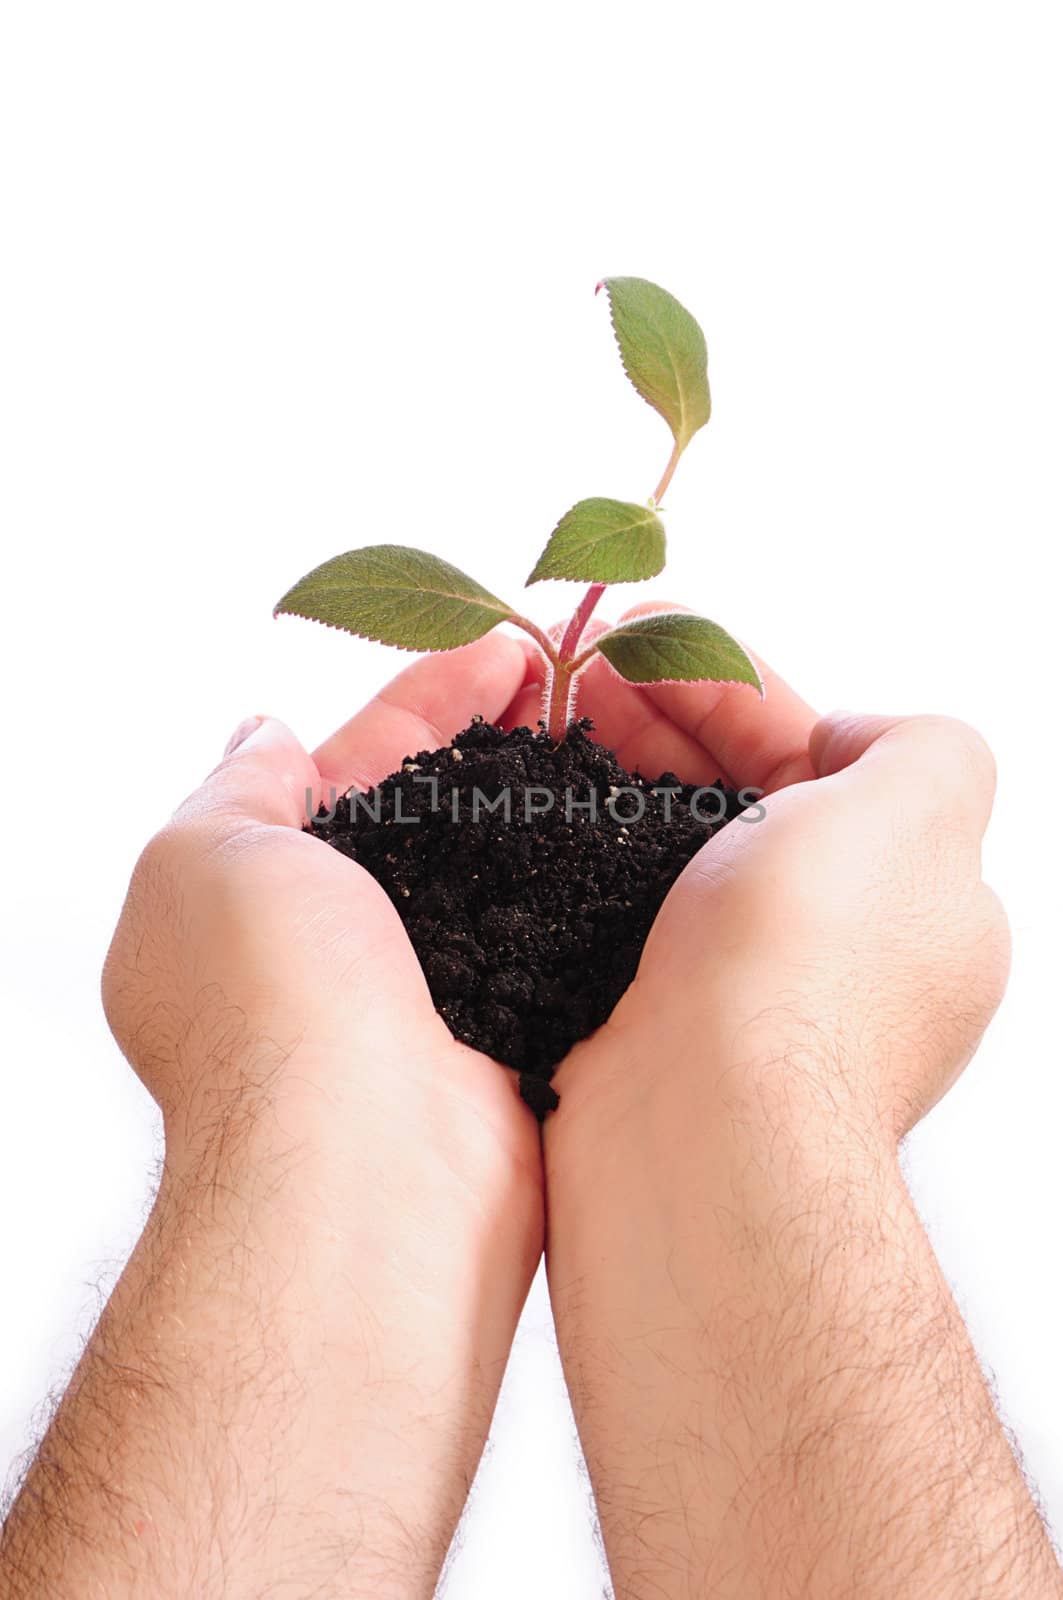 Hands holding a small plant